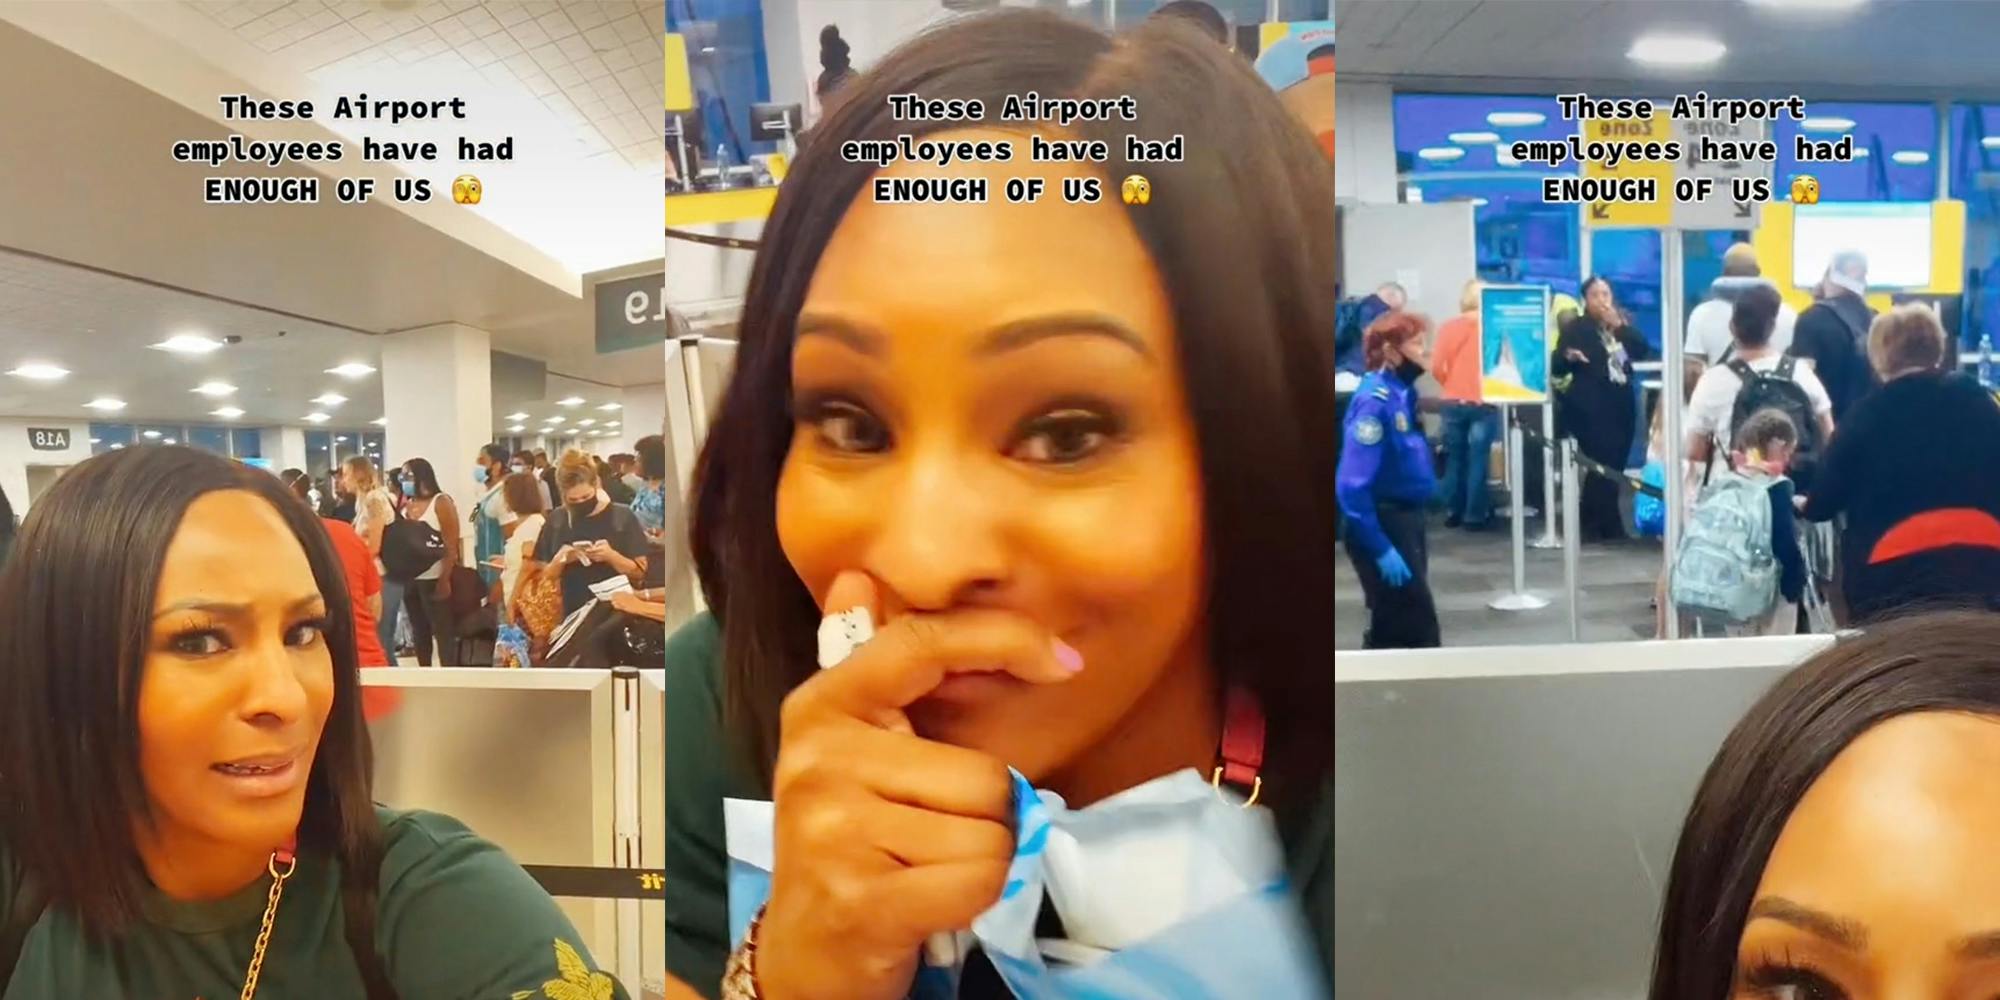 Woman in airport films staff over loudspeaker with caption "These airport employees are fed up with US"